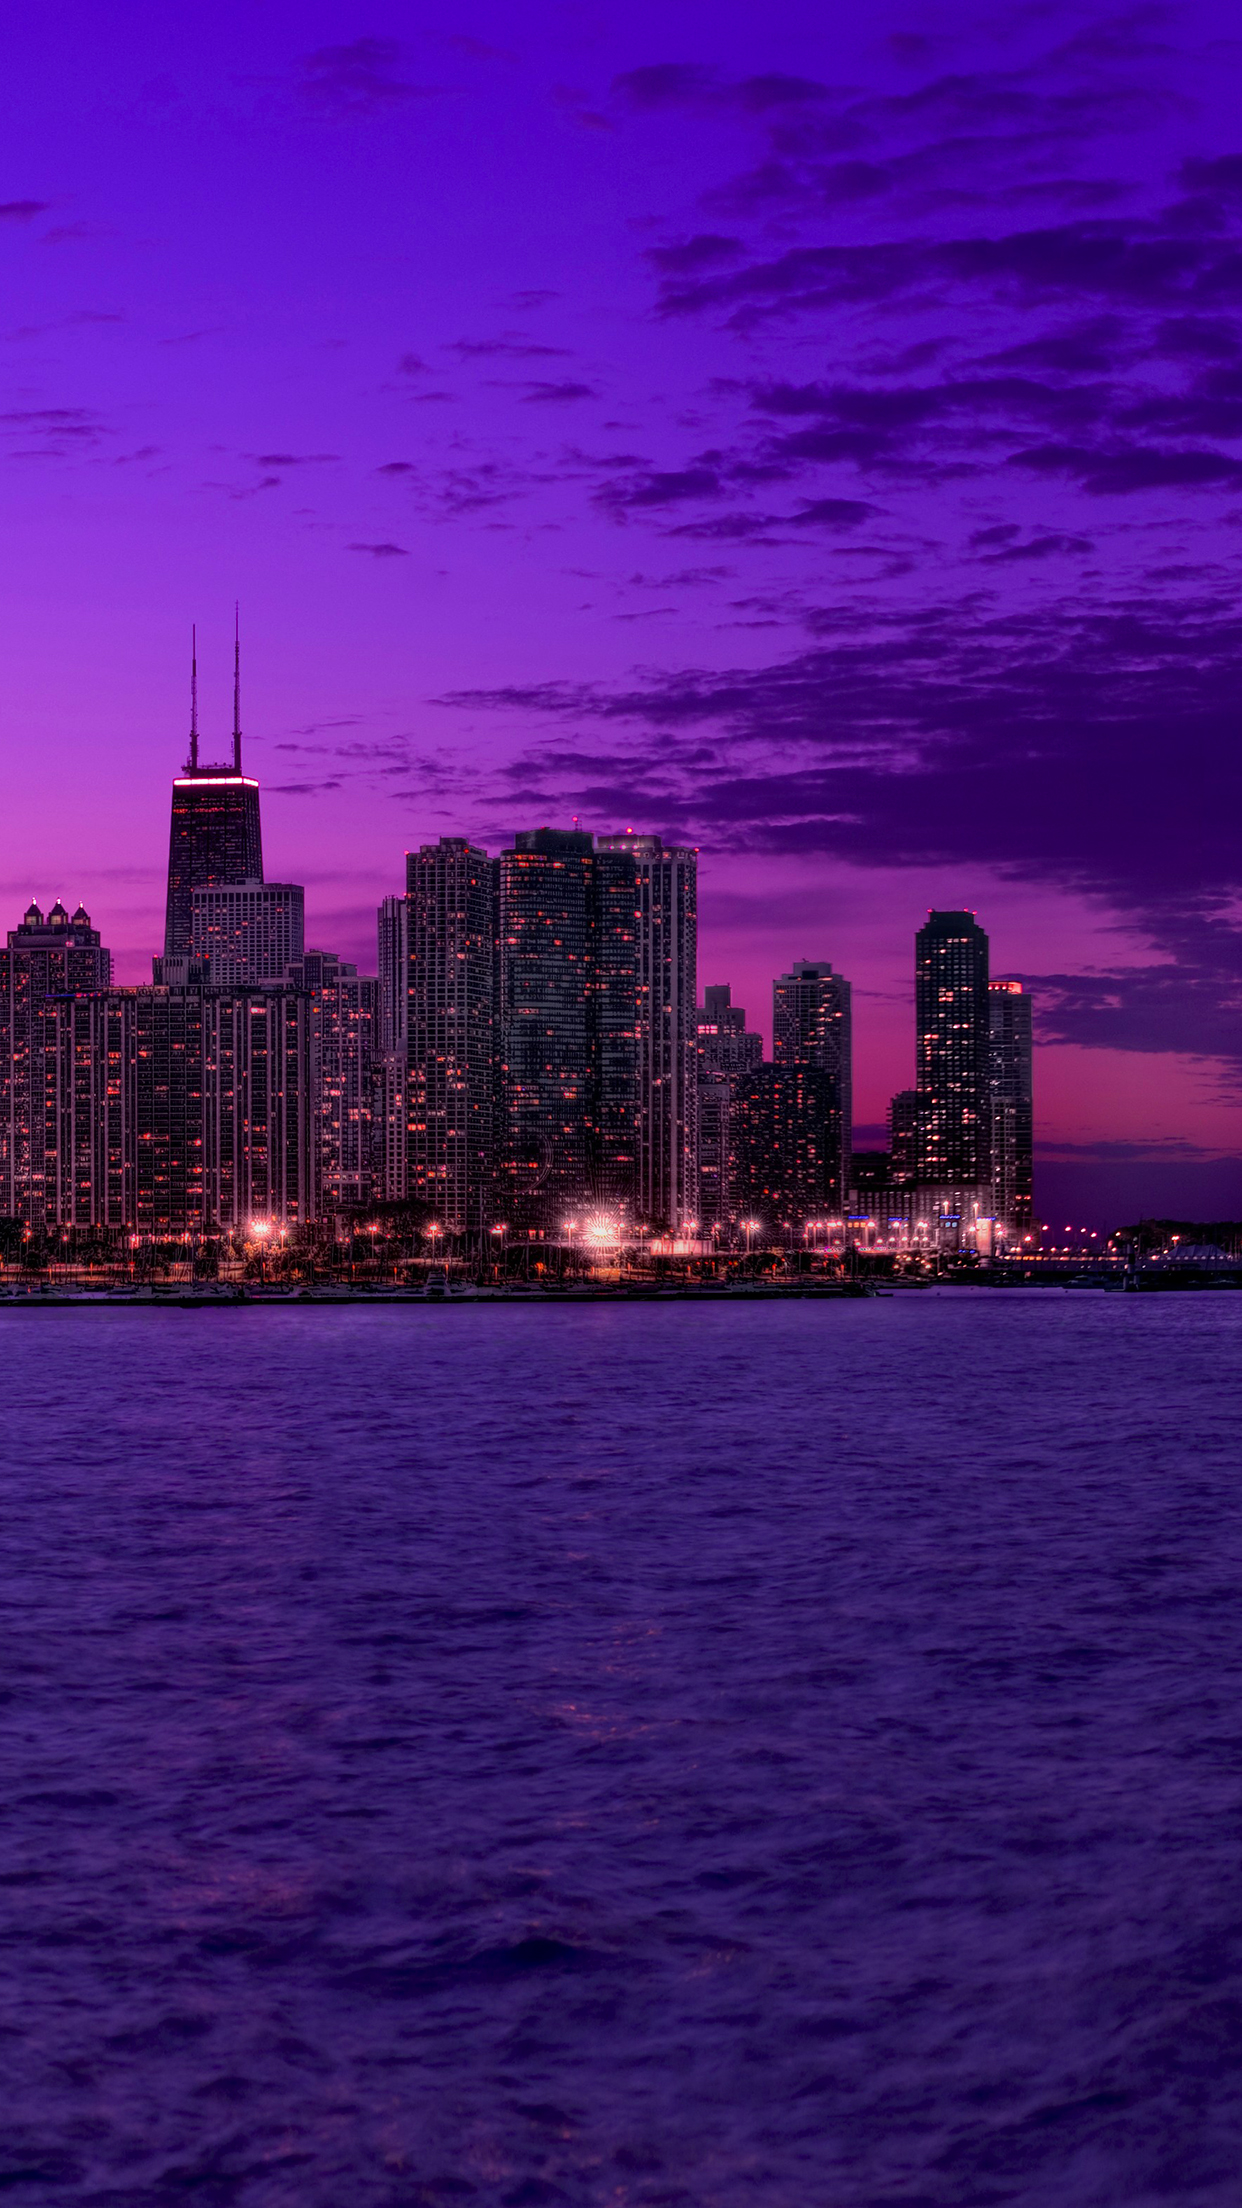 Usa Illinois Chicago Wallpaper for iPhone Pro Max, X, 6